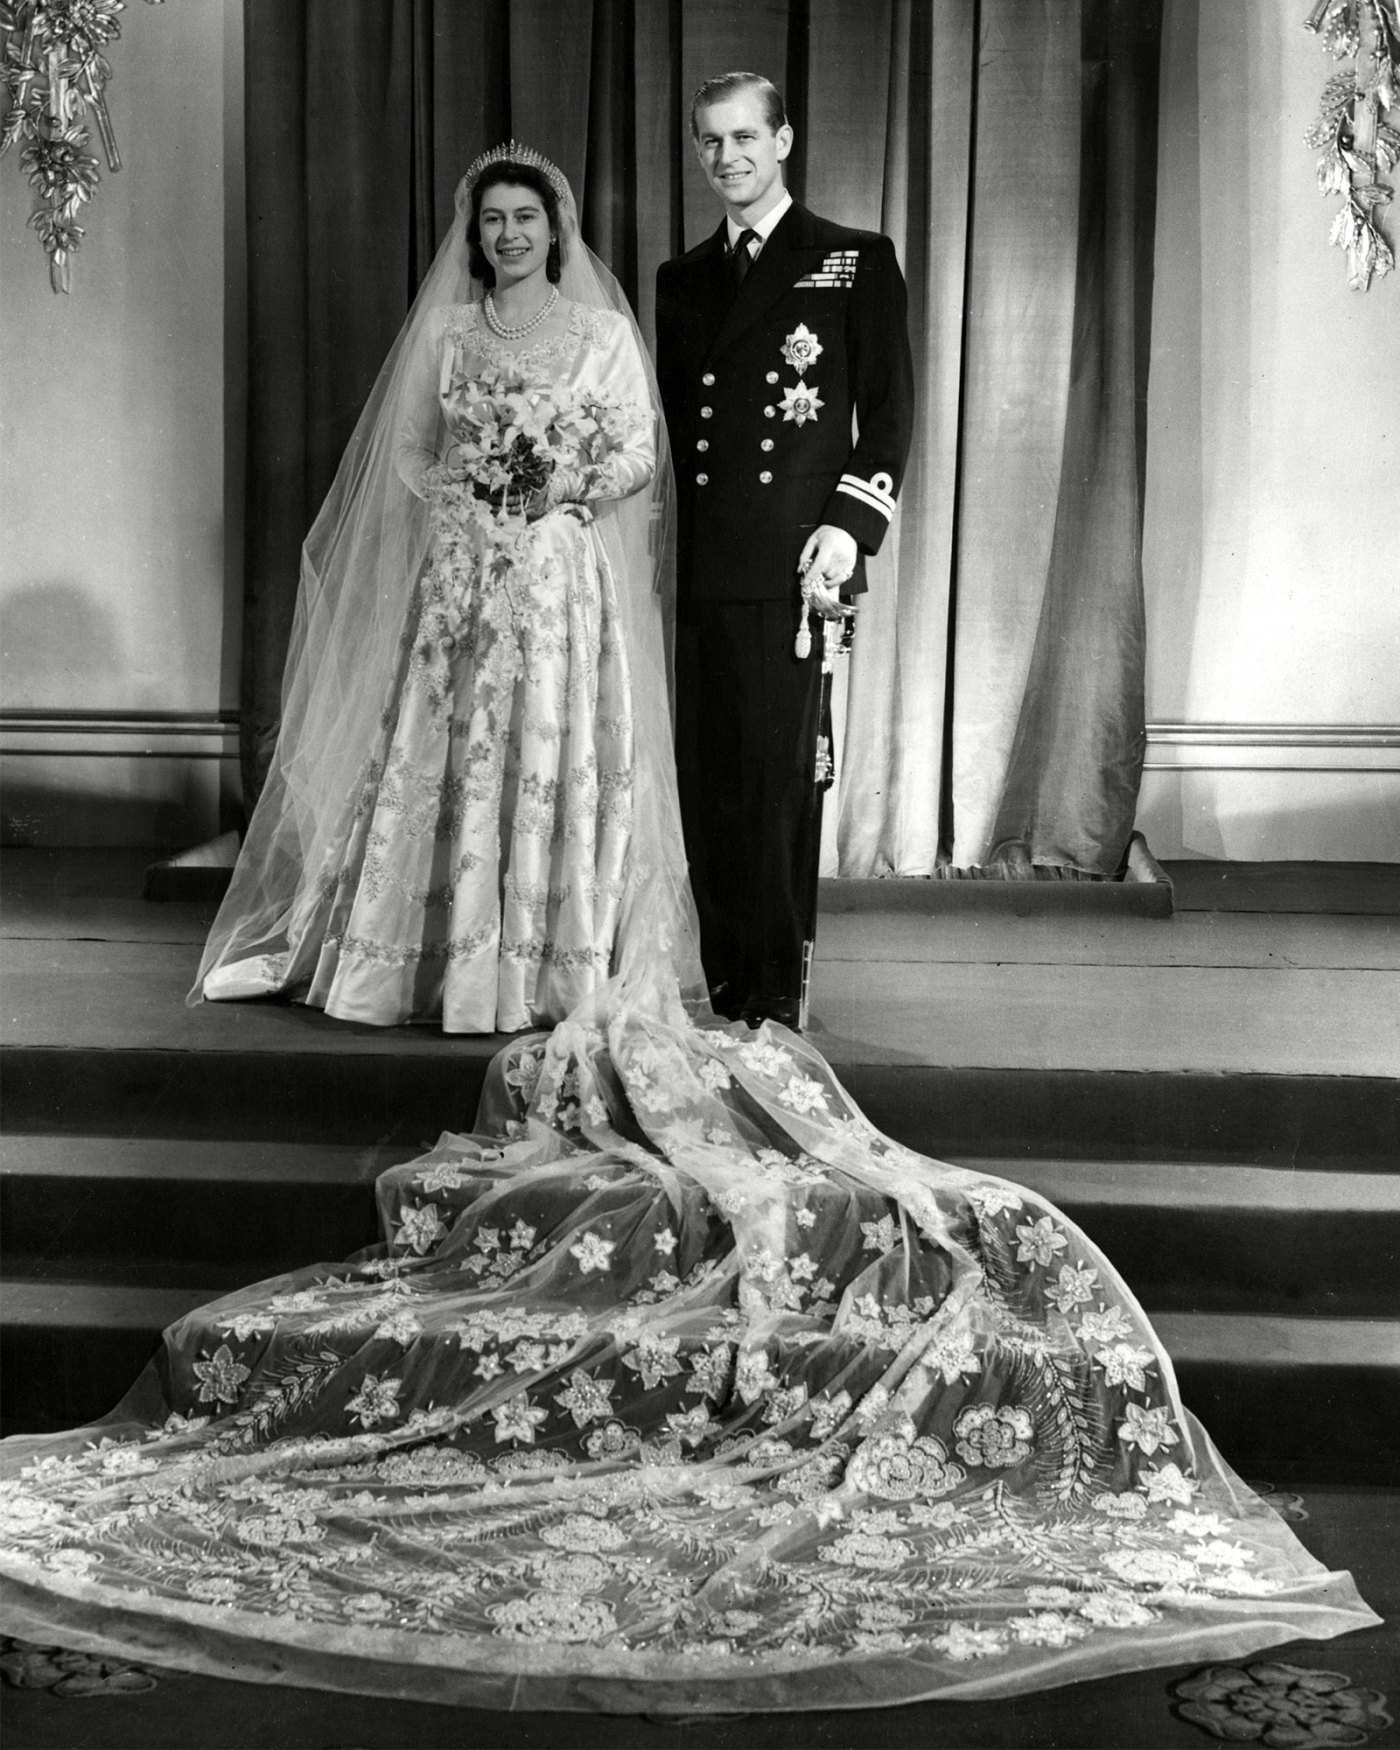 Queen Elizabeth Used Ration Coupons to Pay for Wedding Dress